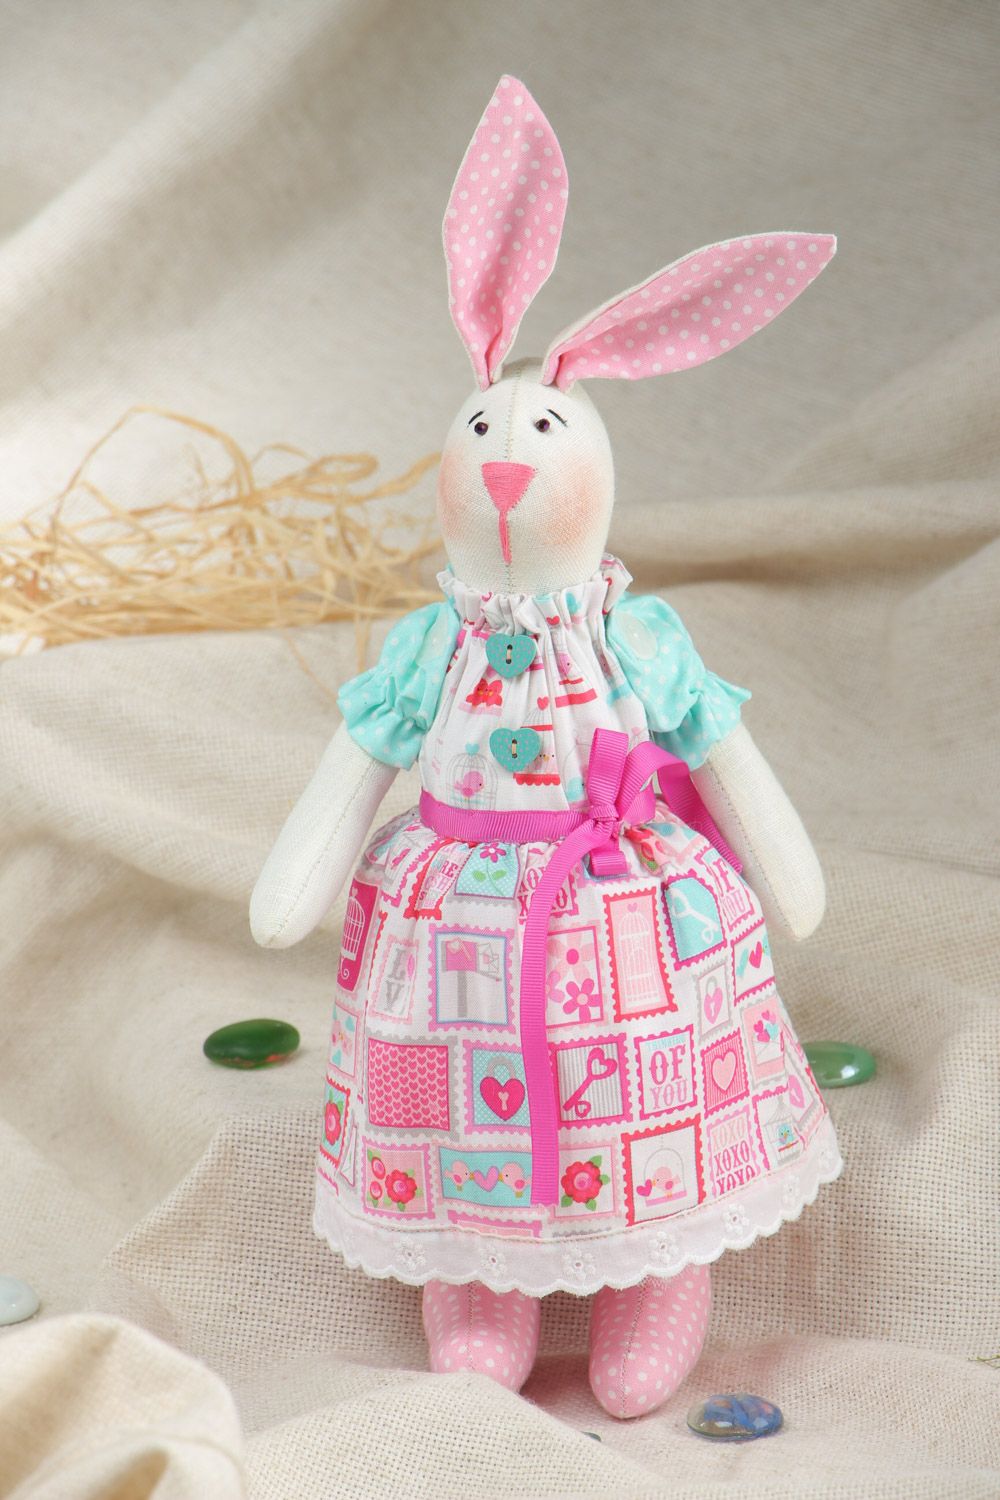 Cute handmade soft toy sewn of natural fabrics Rabbit with pink ears and dress photo 1